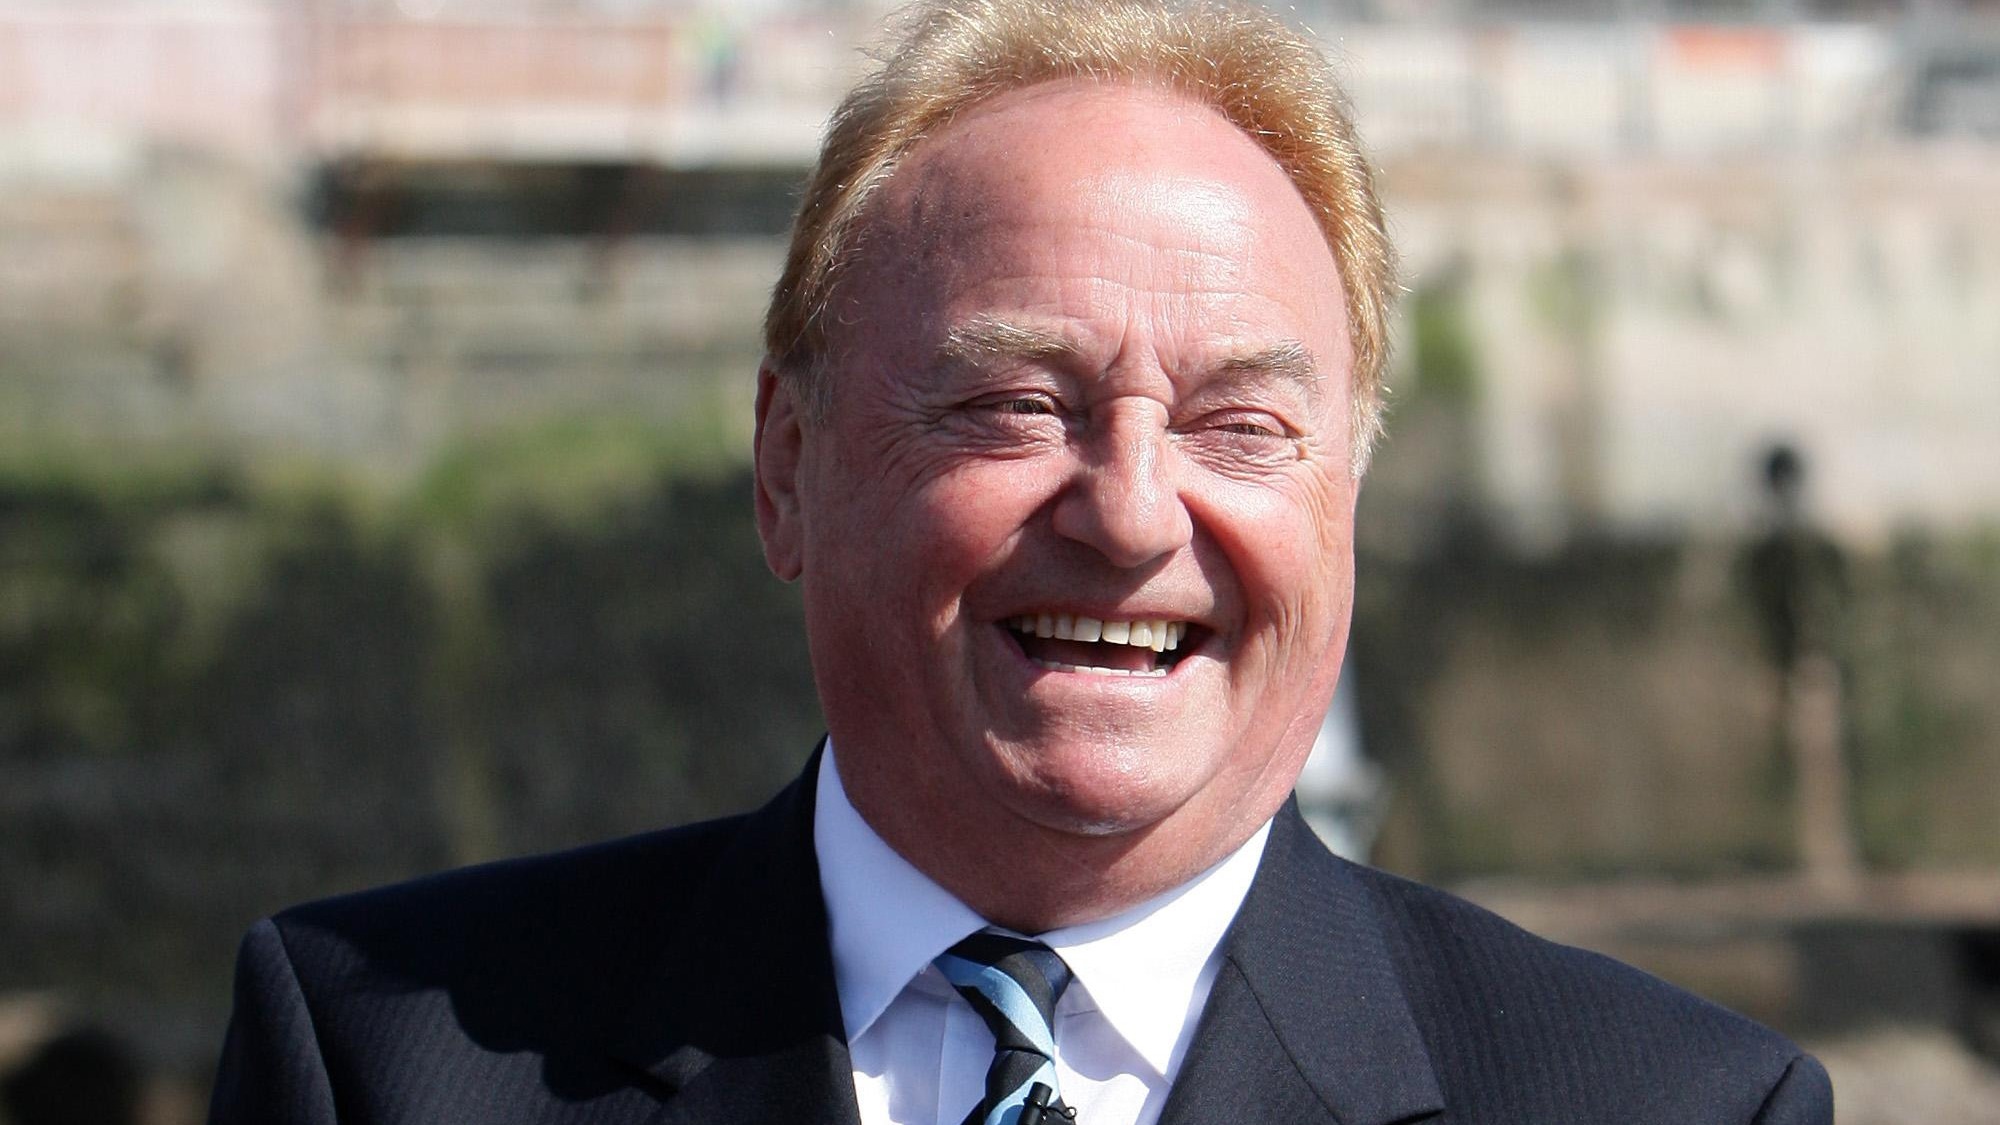 Liverpool S You Ll Never Walk Alone Singer Gerry Marsden Dies Aged 78 Itv News